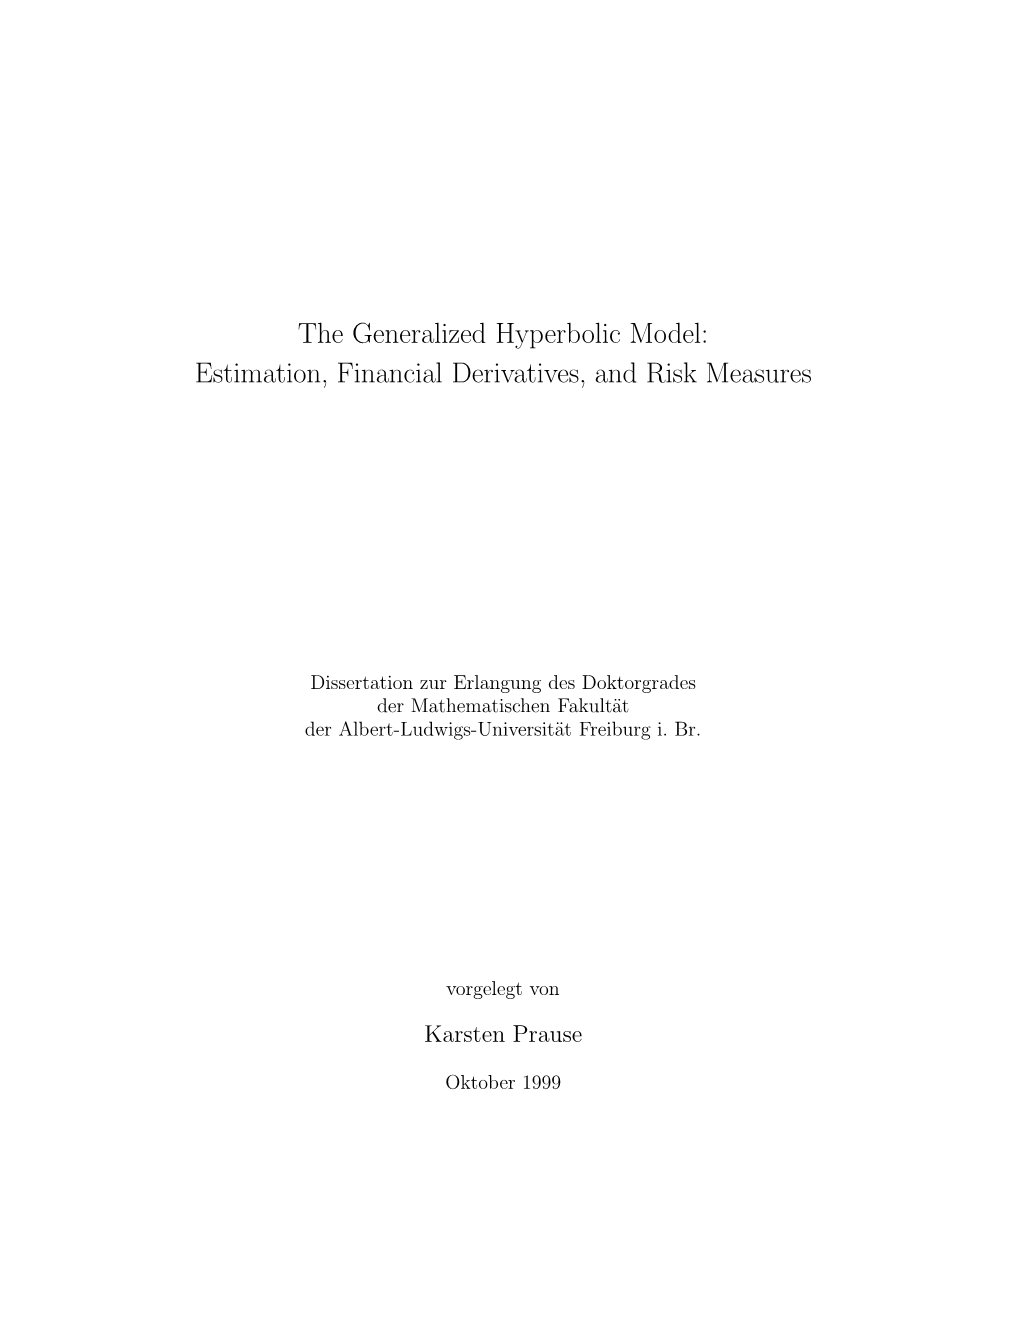 The Generalized Hyperbolic Model: Estimation, Financial Derivatives, and Risk Measures